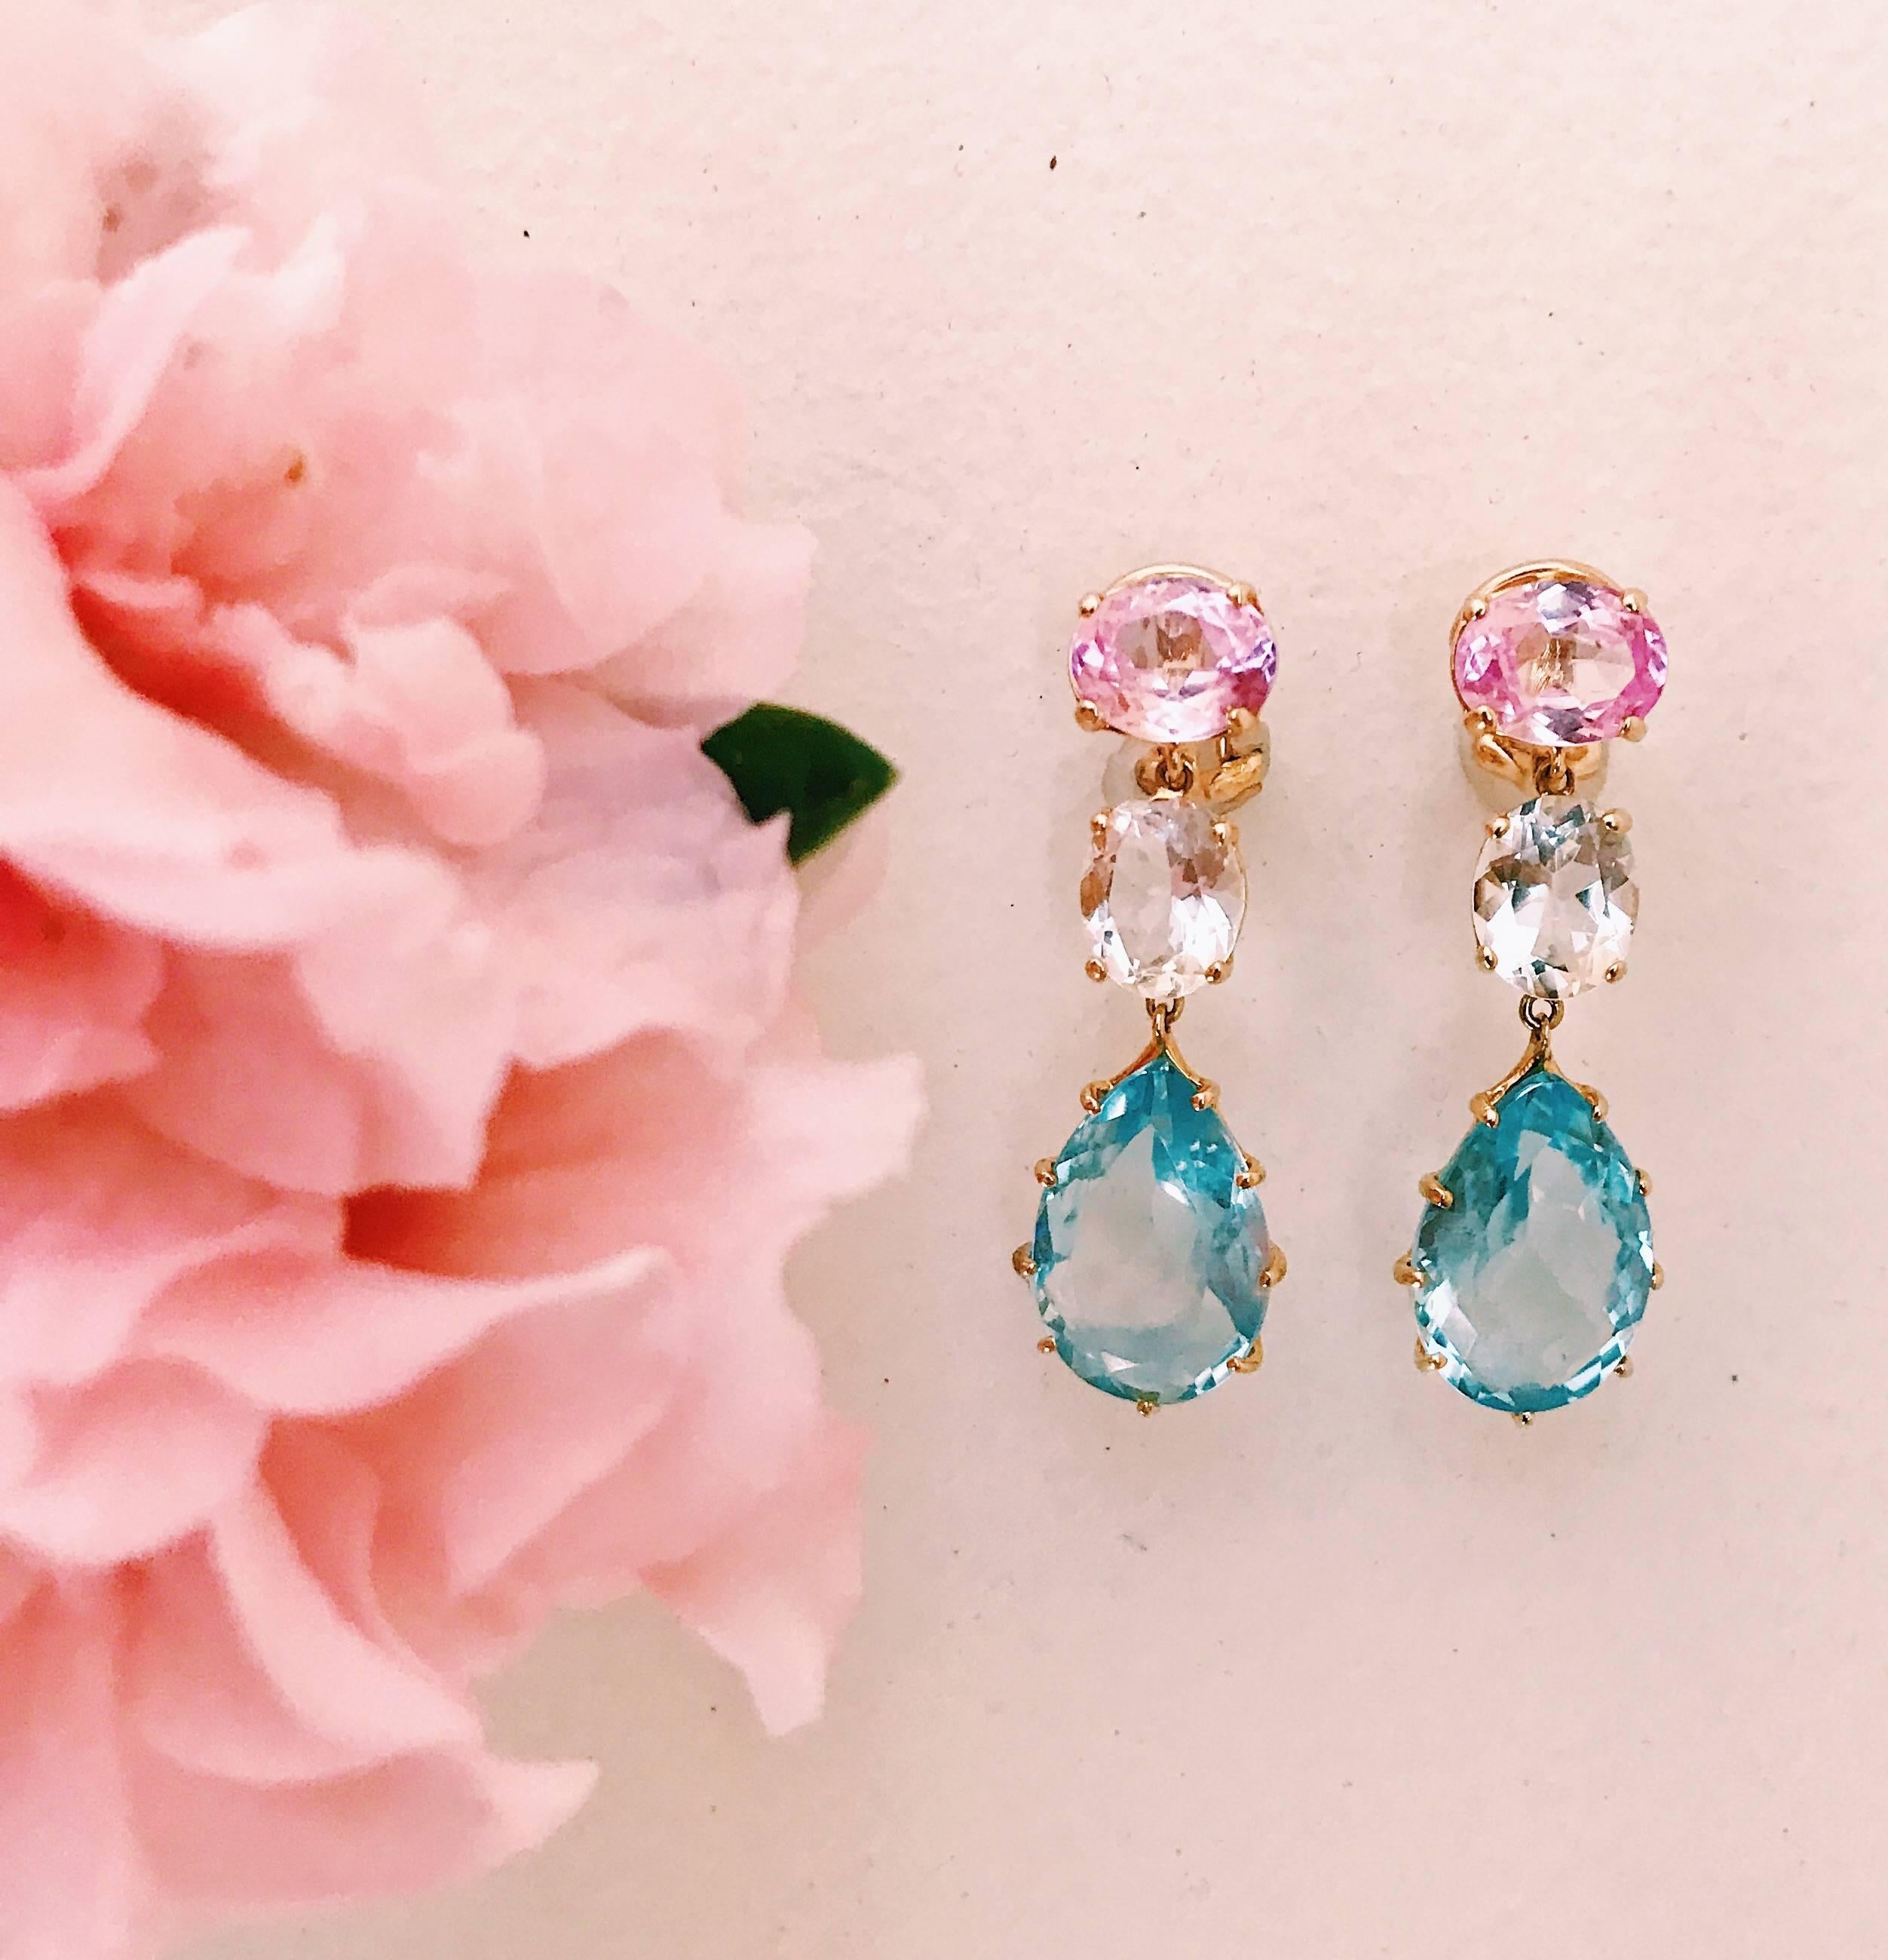 18kt Yellow Gold 3-stone drop earring with faceted Pink Topaz, faceted rock crystal, and faceted Blue Topaz.

Clip omega back, can be posted or clip.

Specifications: Length: 1 5/8"

Please let me know if you have any